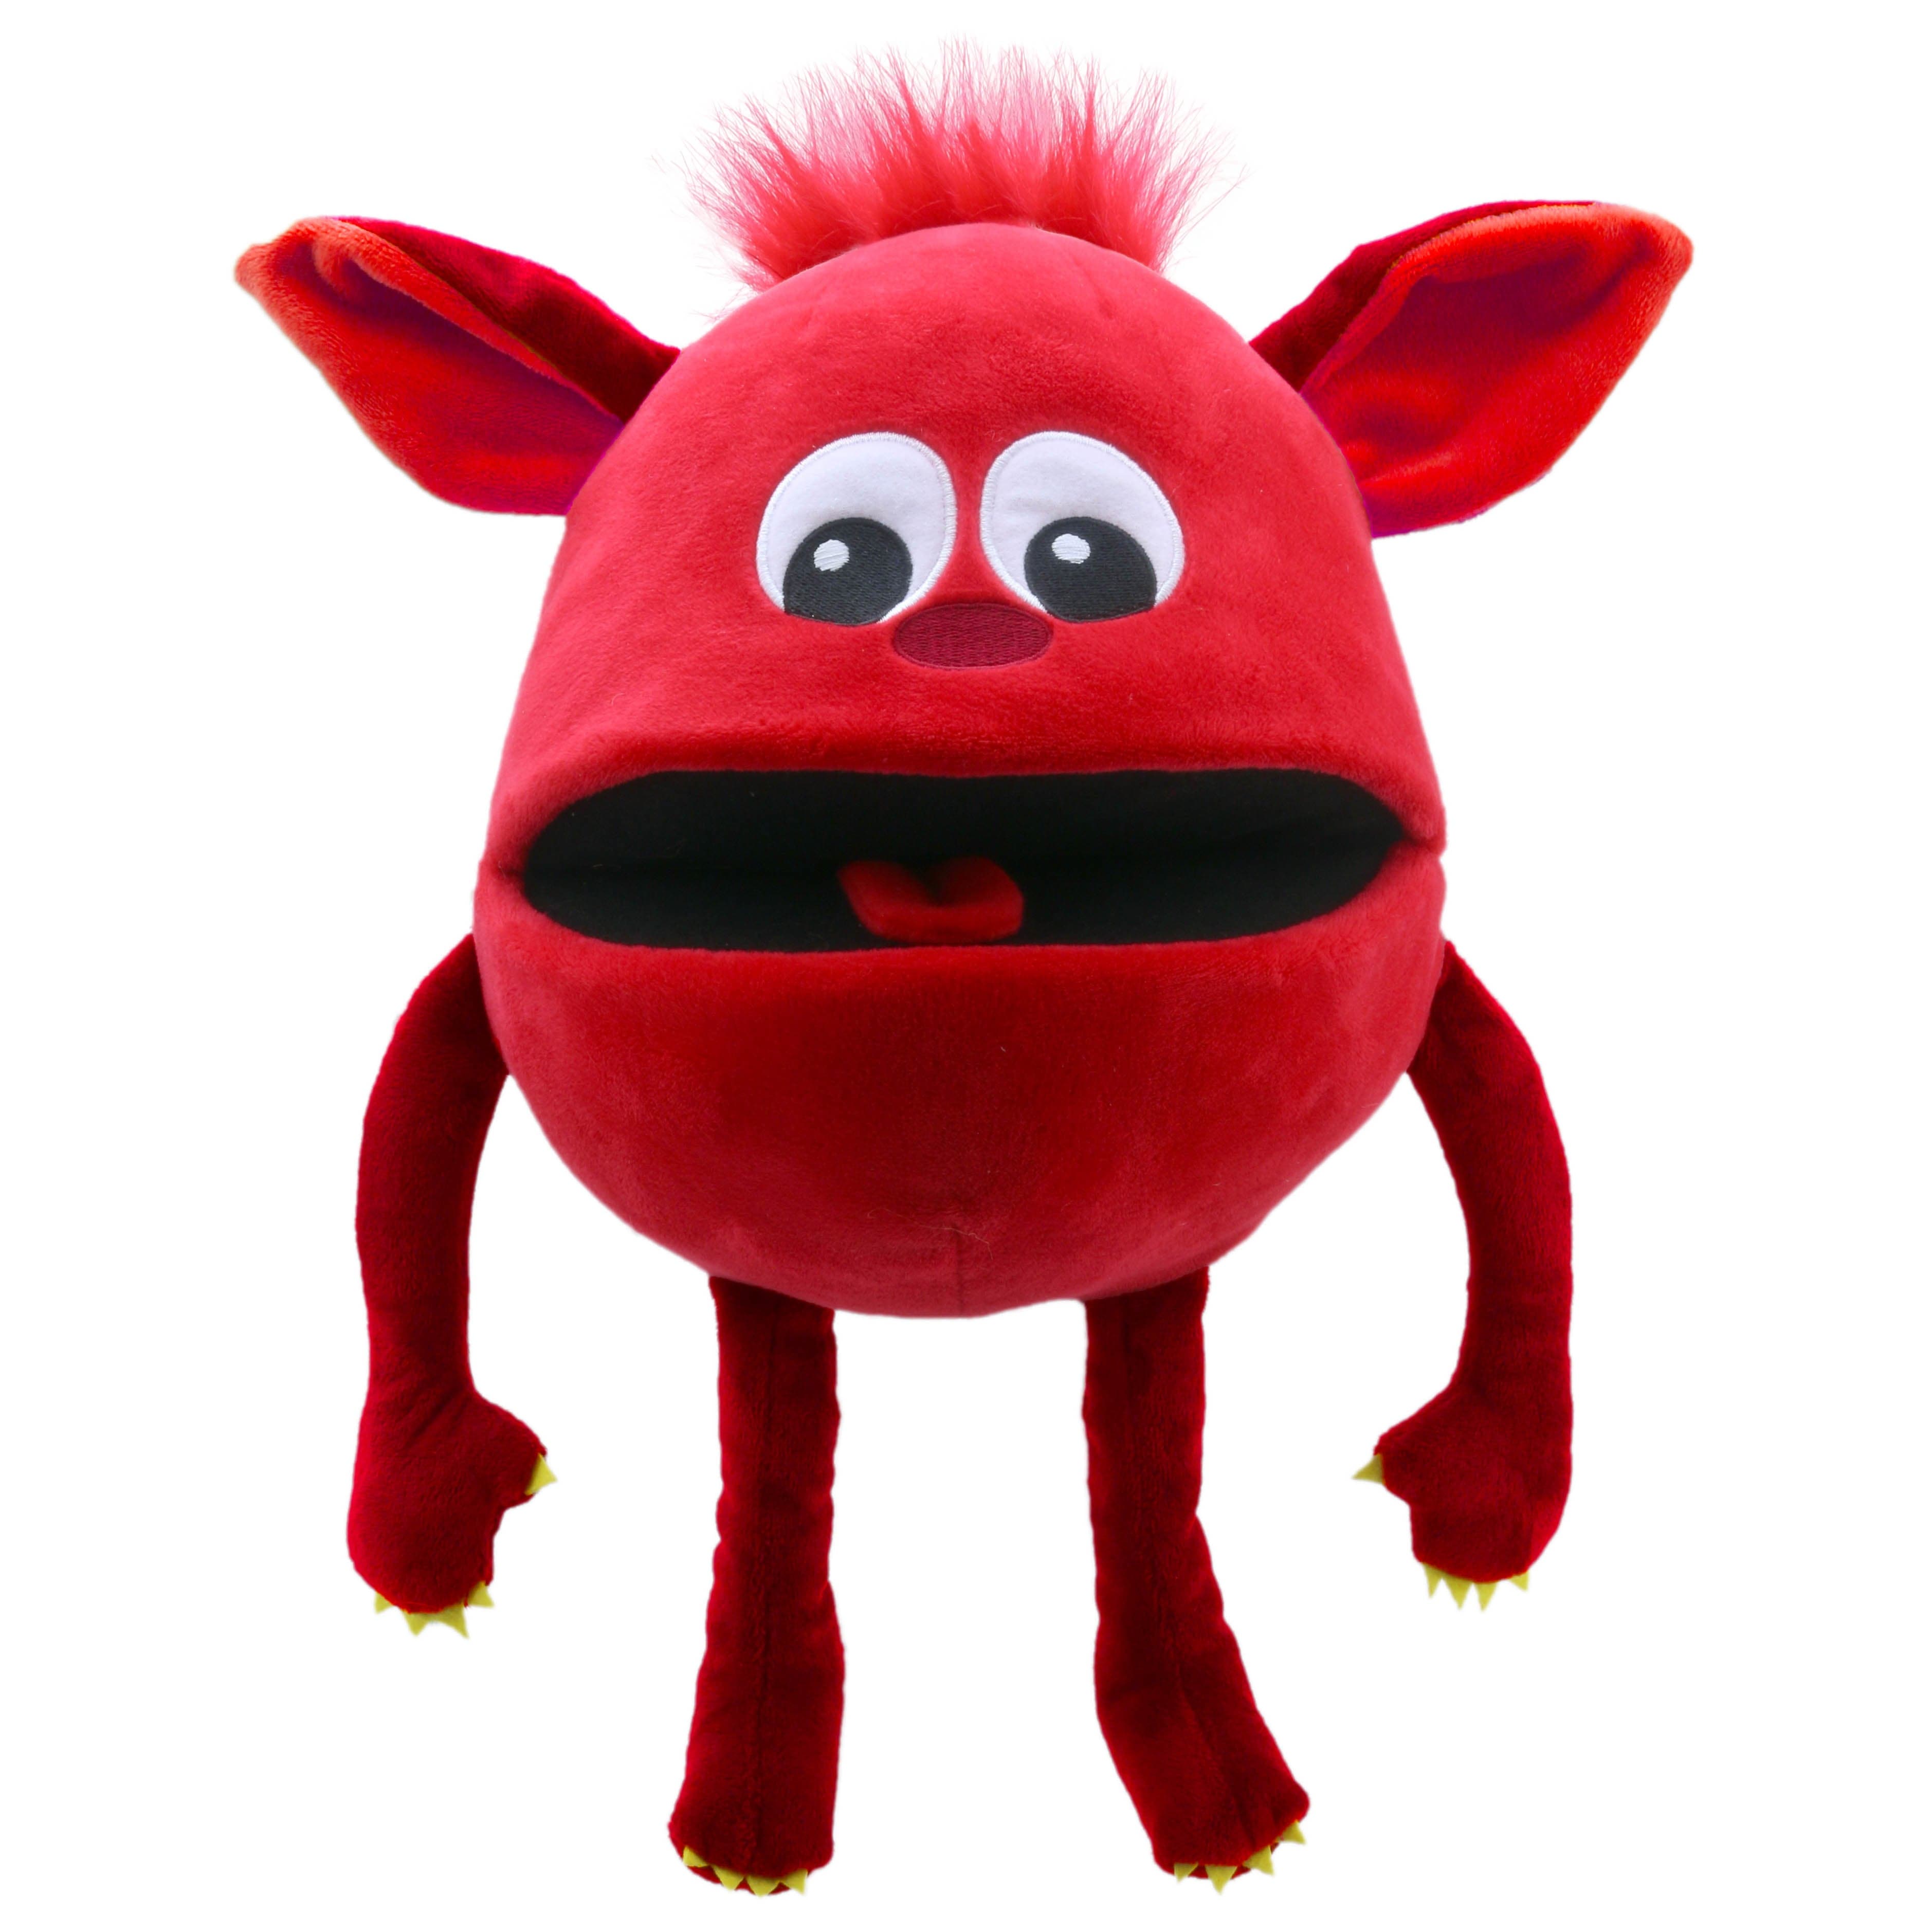 The Puppet Company-Baby Monsters Puppet - Red Monster-PC004408-Legacy Toys